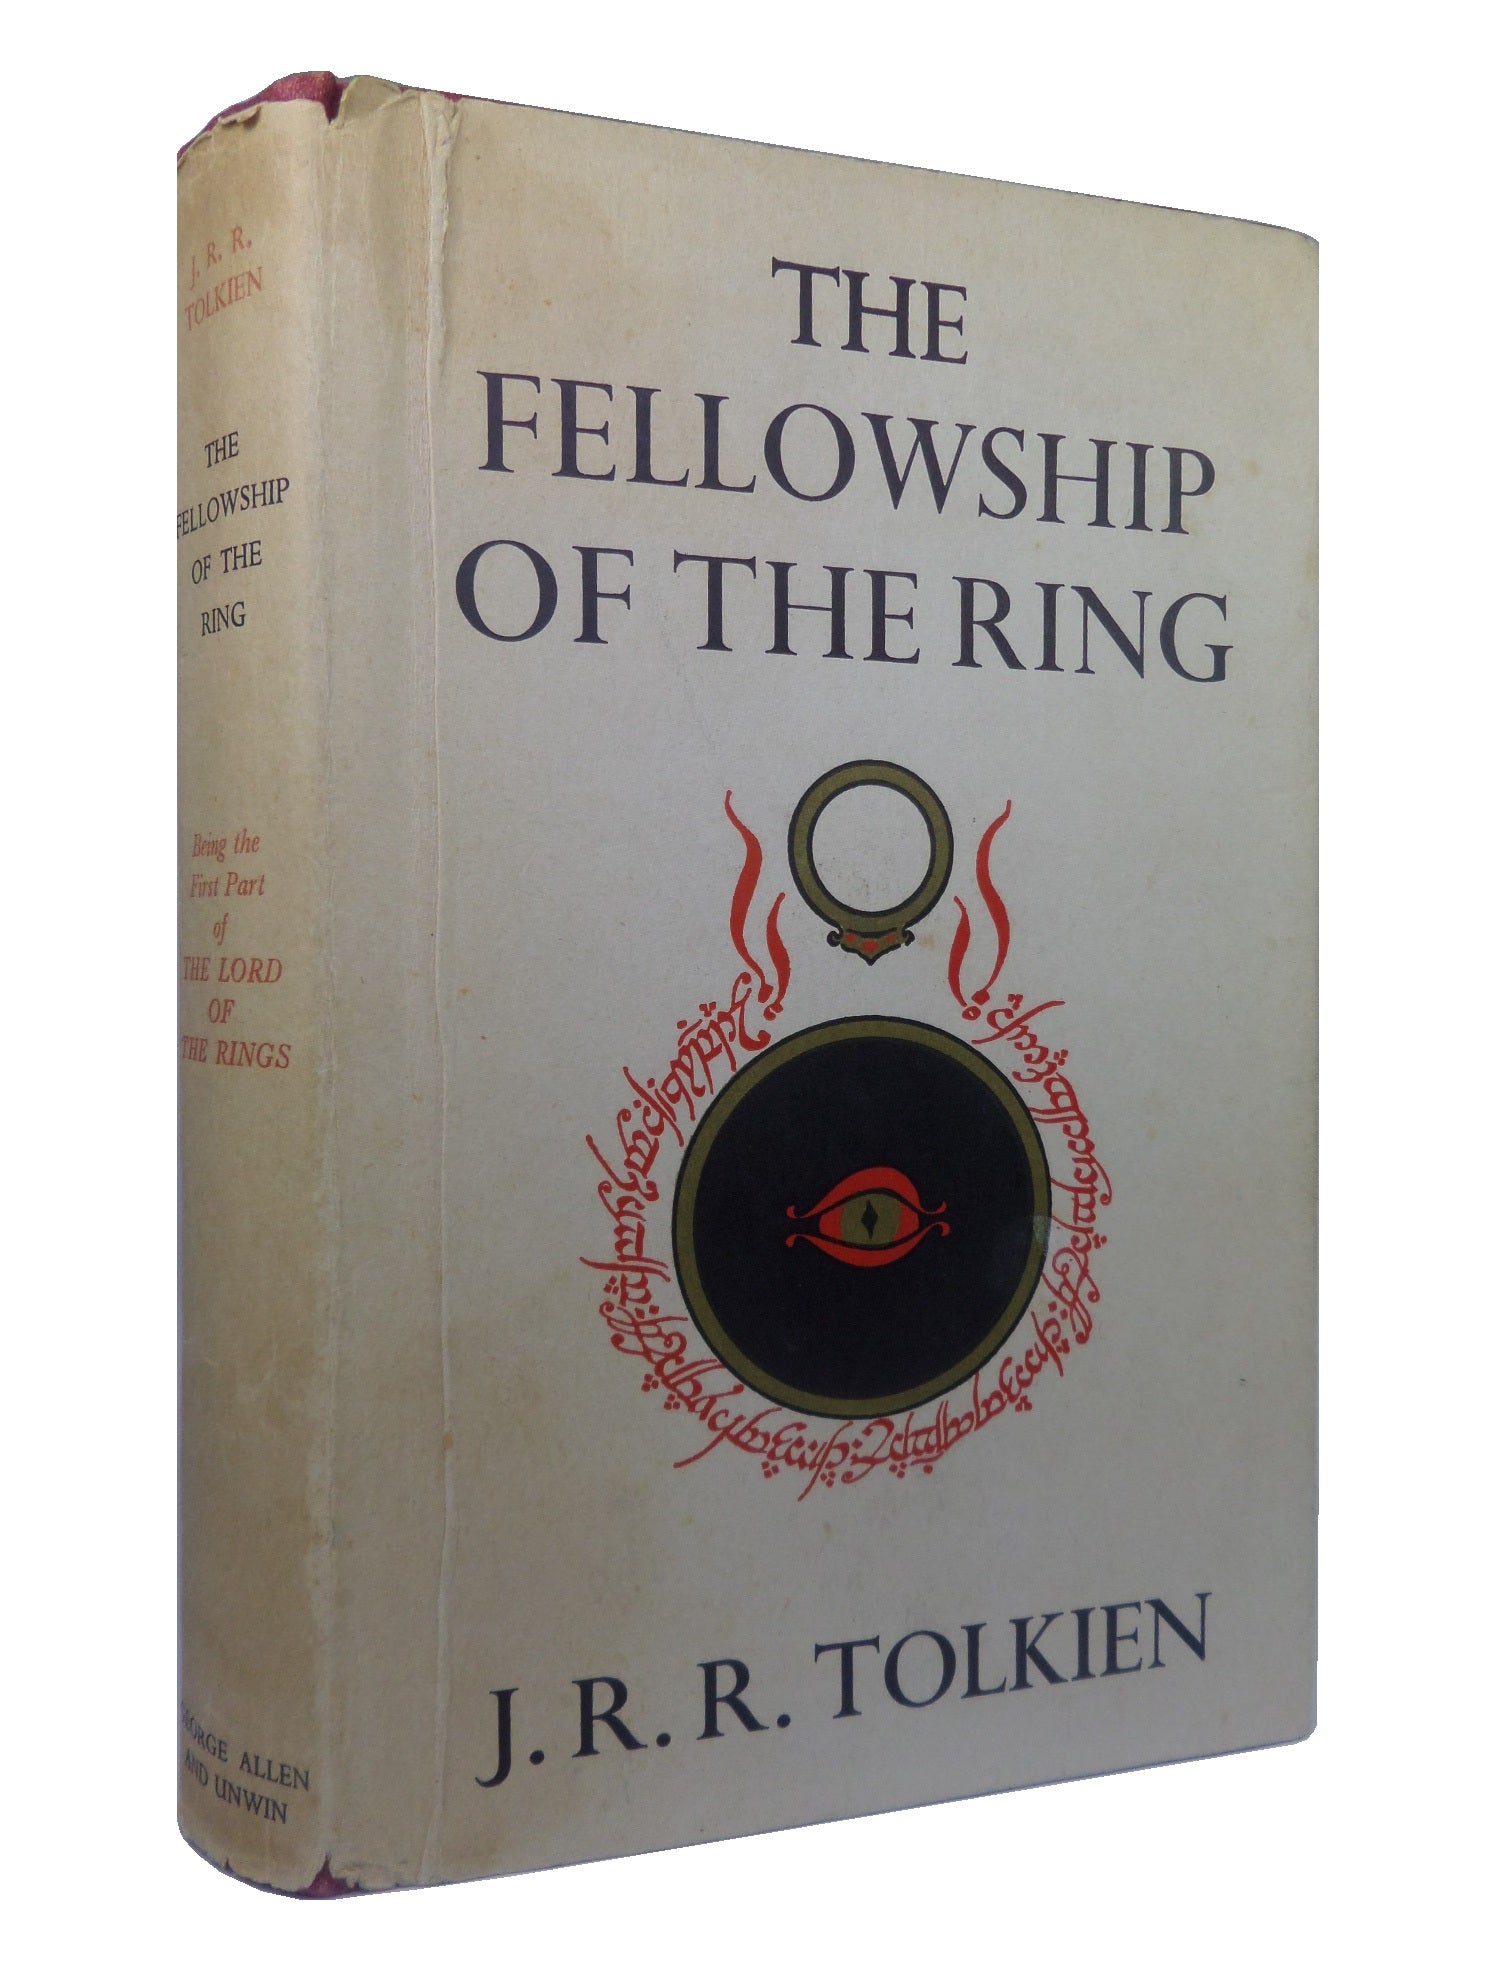 THE FELLOWSHIP OF THE RING [LORD OF THE RINGS] 1965 JRR TOLKIEN 1ST ED, 14TH IMP